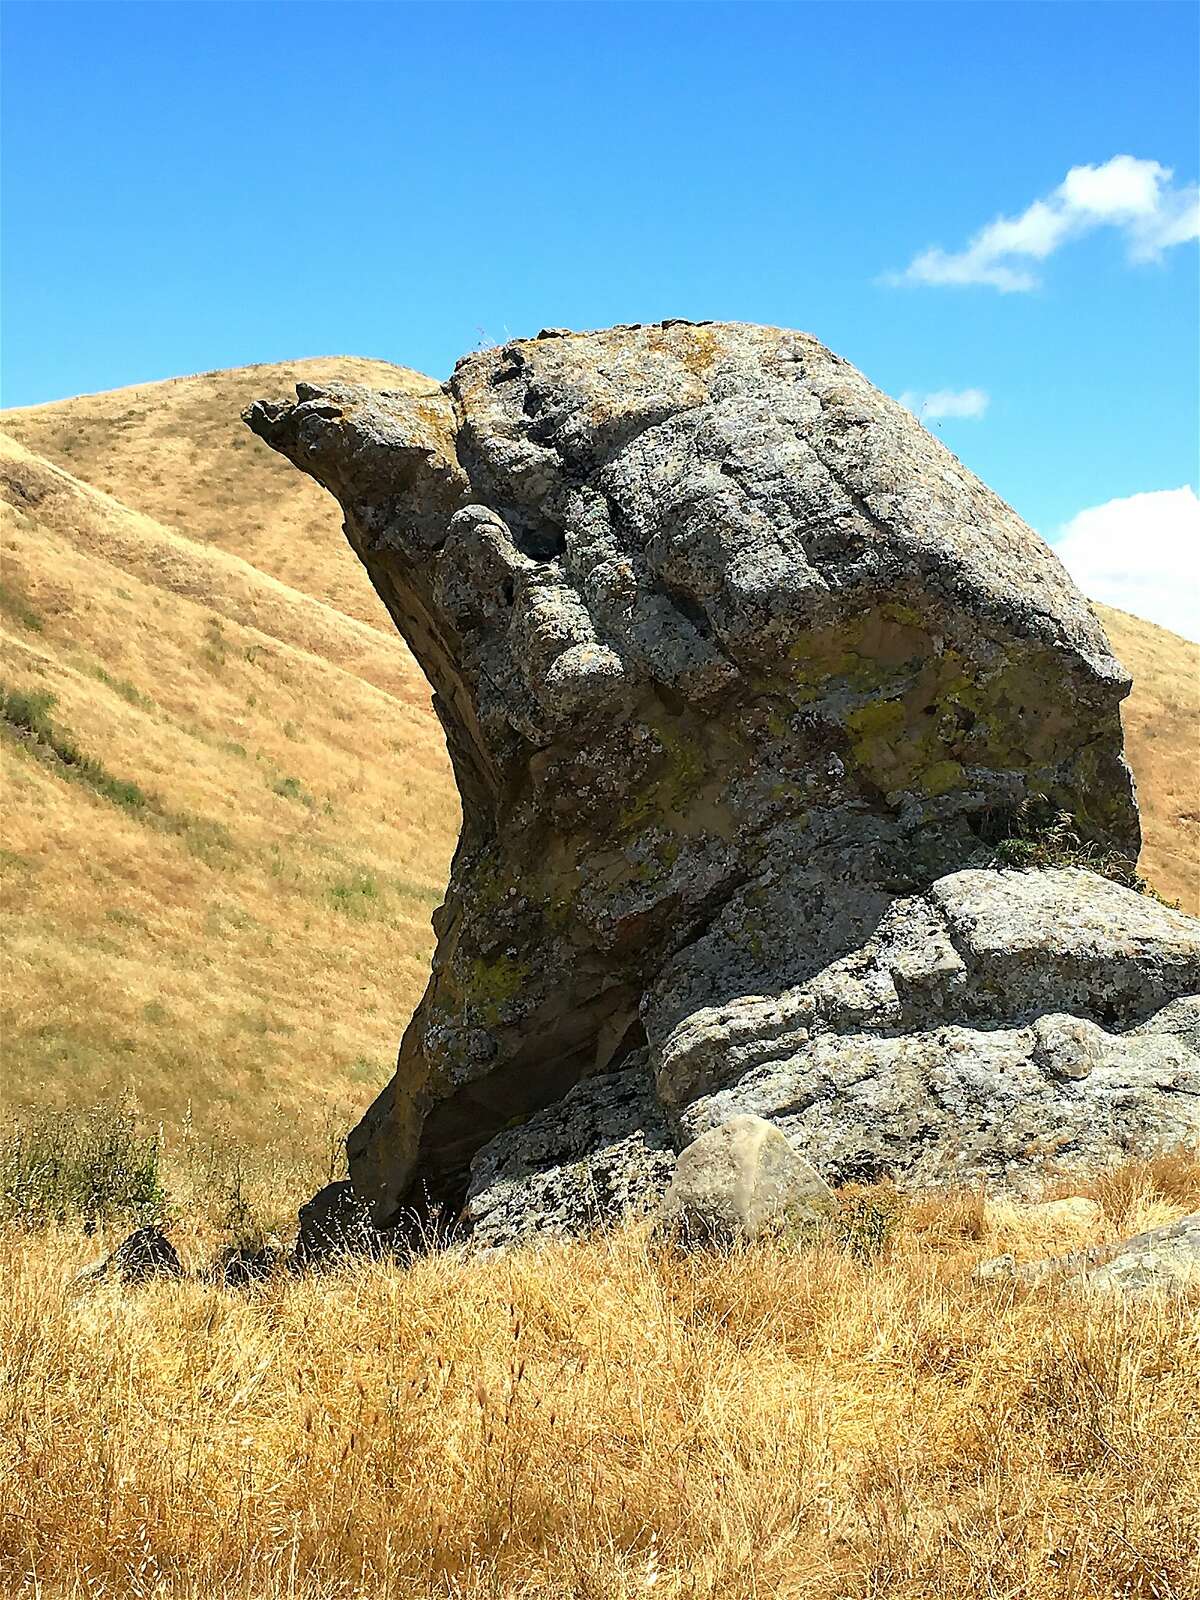 A rock formation, when viewed from the proper angle and when the sun hits it just right, looks like a bird head, located in Las Trampas Regional Wilderness near San Ramon